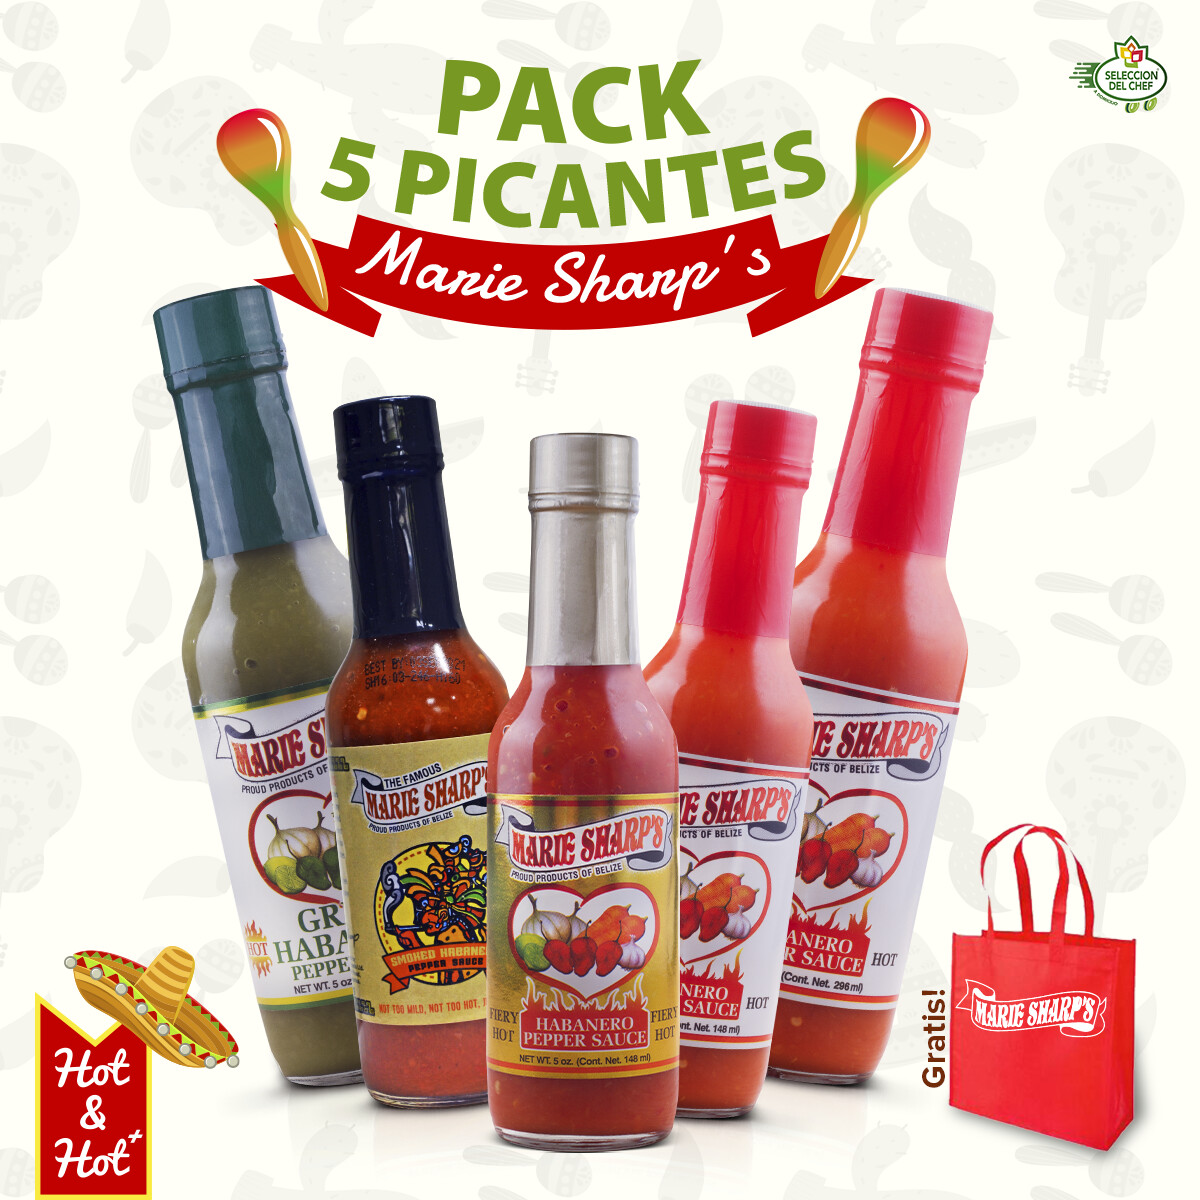 Pack! 5 Picantes Marie Sharp's®